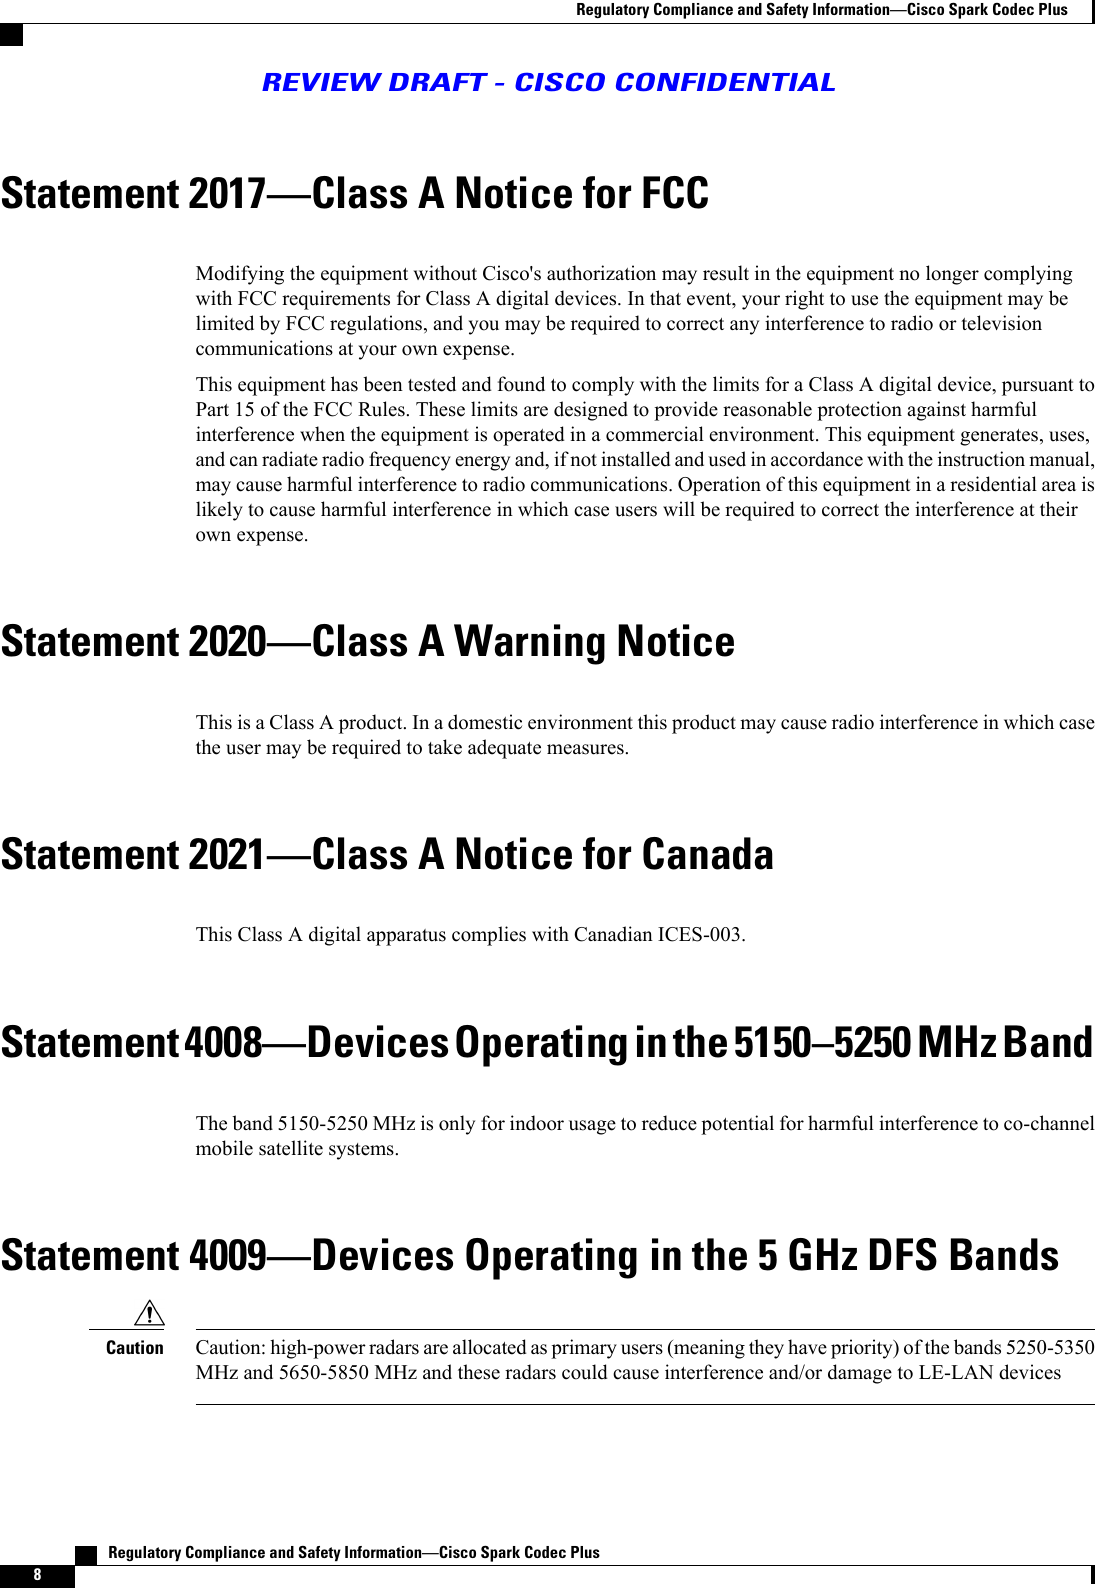 Statement 2017Class A Notice for FCCModifying the equipment without Cisco&apos;s authorization may result in the equipment no longer complyingwith FCC requirements for Class A digital devices. In that event, your right to use the equipment may belimited by FCC regulations, and you may be required to correct any interference to radio or televisioncommunications at your own expense.This equipment has been tested and found to comply with the limits for a Class A digital device, pursuant toPart 15 of the FCC Rules. These limits are designed to provide reasonable protection against harmfulinterference when the equipment is operated in a commercial environment. This equipment generates, uses,and can radiate radio frequency energy and, if not installed and used in accordance with the instruction manual,may cause harmful interference to radio communications. Operation of this equipment in a residential area islikely to cause harmful interference in which case users will be required to correct the interference at theirown expense.Statement 2020Class A Warning NoticeThis is a Class A product. In a domestic environment this product may cause radio interference in which casethe user may be required to take adequate measures.Statement 2021Class A Notice for CanadaThis Class A digital apparatus complies with Canadian ICES-003.Statement 4008Devices Operating in the 51505250 MHz BandThe band 5150-5250 MHz is only for indoor usage to reduce potential for harmful interference to co-channelmobile satellite systems.Statement 4009Devices Operating in the 5 GHz DFS BandsCaution: high-power radars are allocated as primary users (meaning they have priority) of the bands 5250-5350MHz and 5650-5850 MHz and these radars could cause interference and/or damage to LE-LAN devicesCaution   Regulatory Compliance and Safety InformationCisco Spark Codec Plus8Regulatory Compliance and Safety InformationCisco Spark Codec PlusREVIEW DRAFT - CISCO CONFIDENTIAL